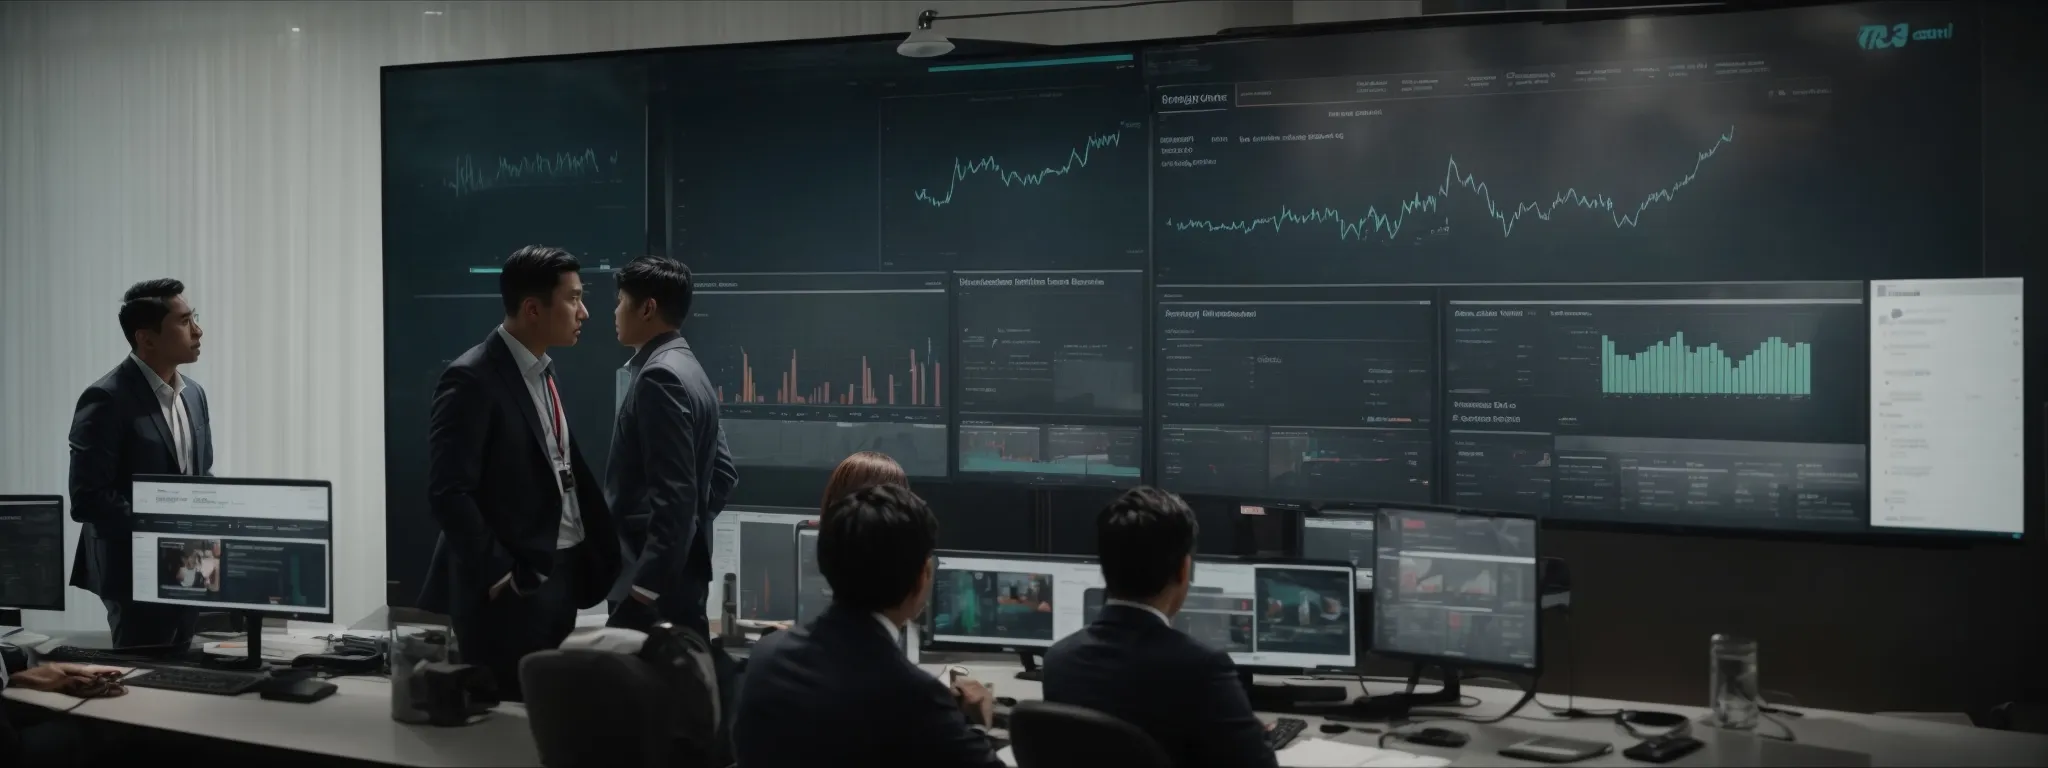 a team of strategists collaborates around a large screen displaying a website analytics dashboard.